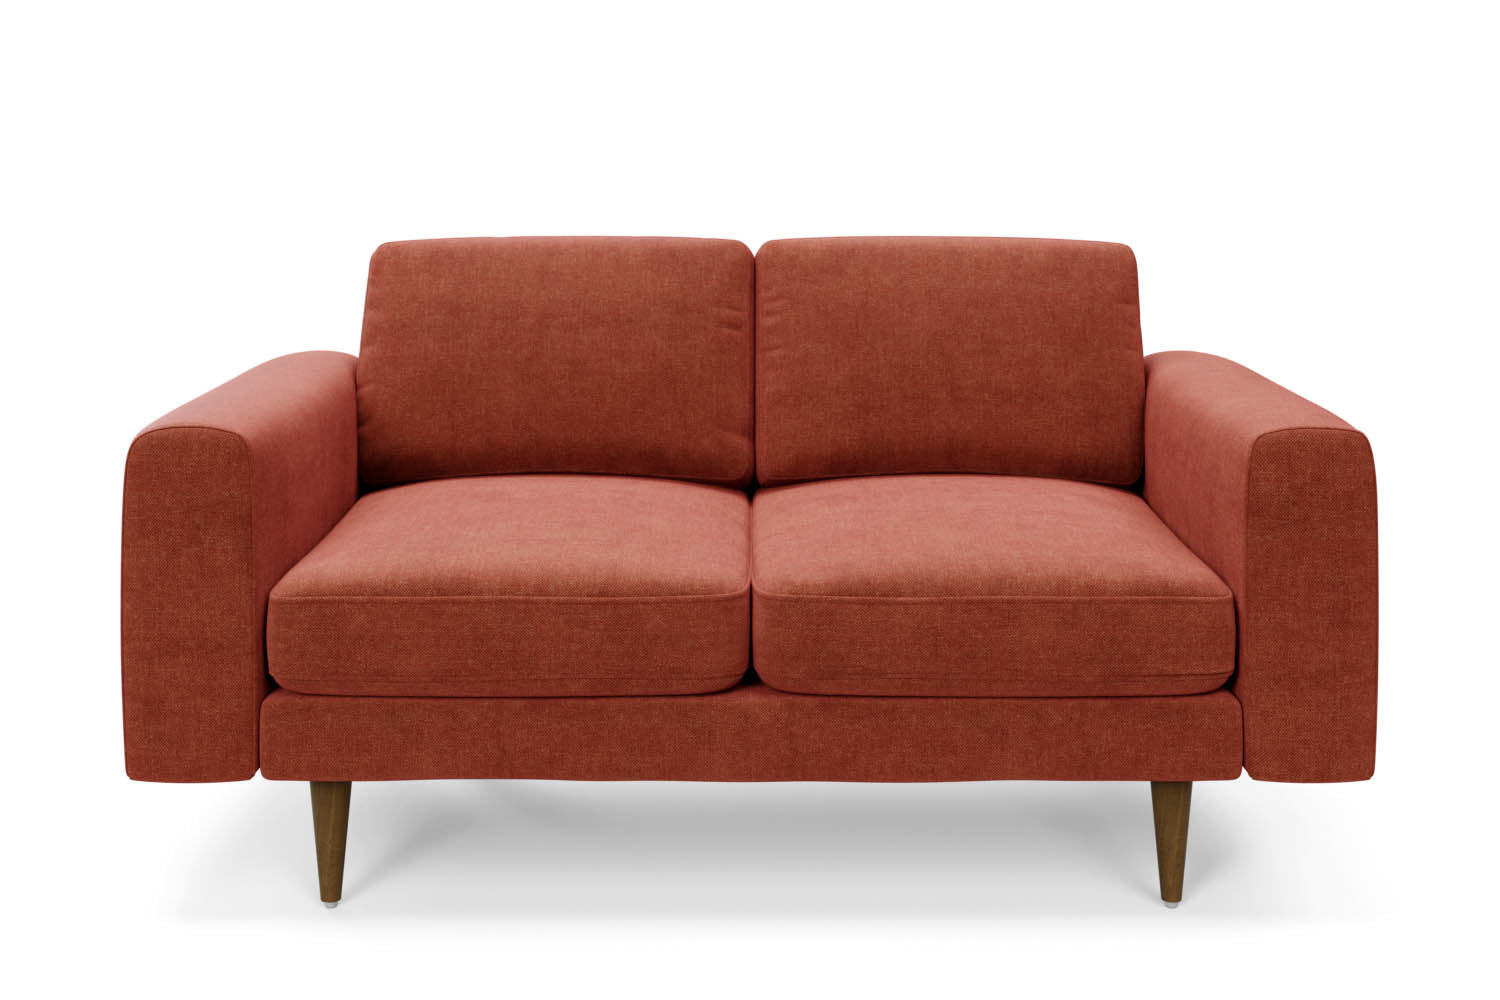 The Big Chill 2 Seater Sofa in Spice Chenille with brown legs front variant_40886266691632